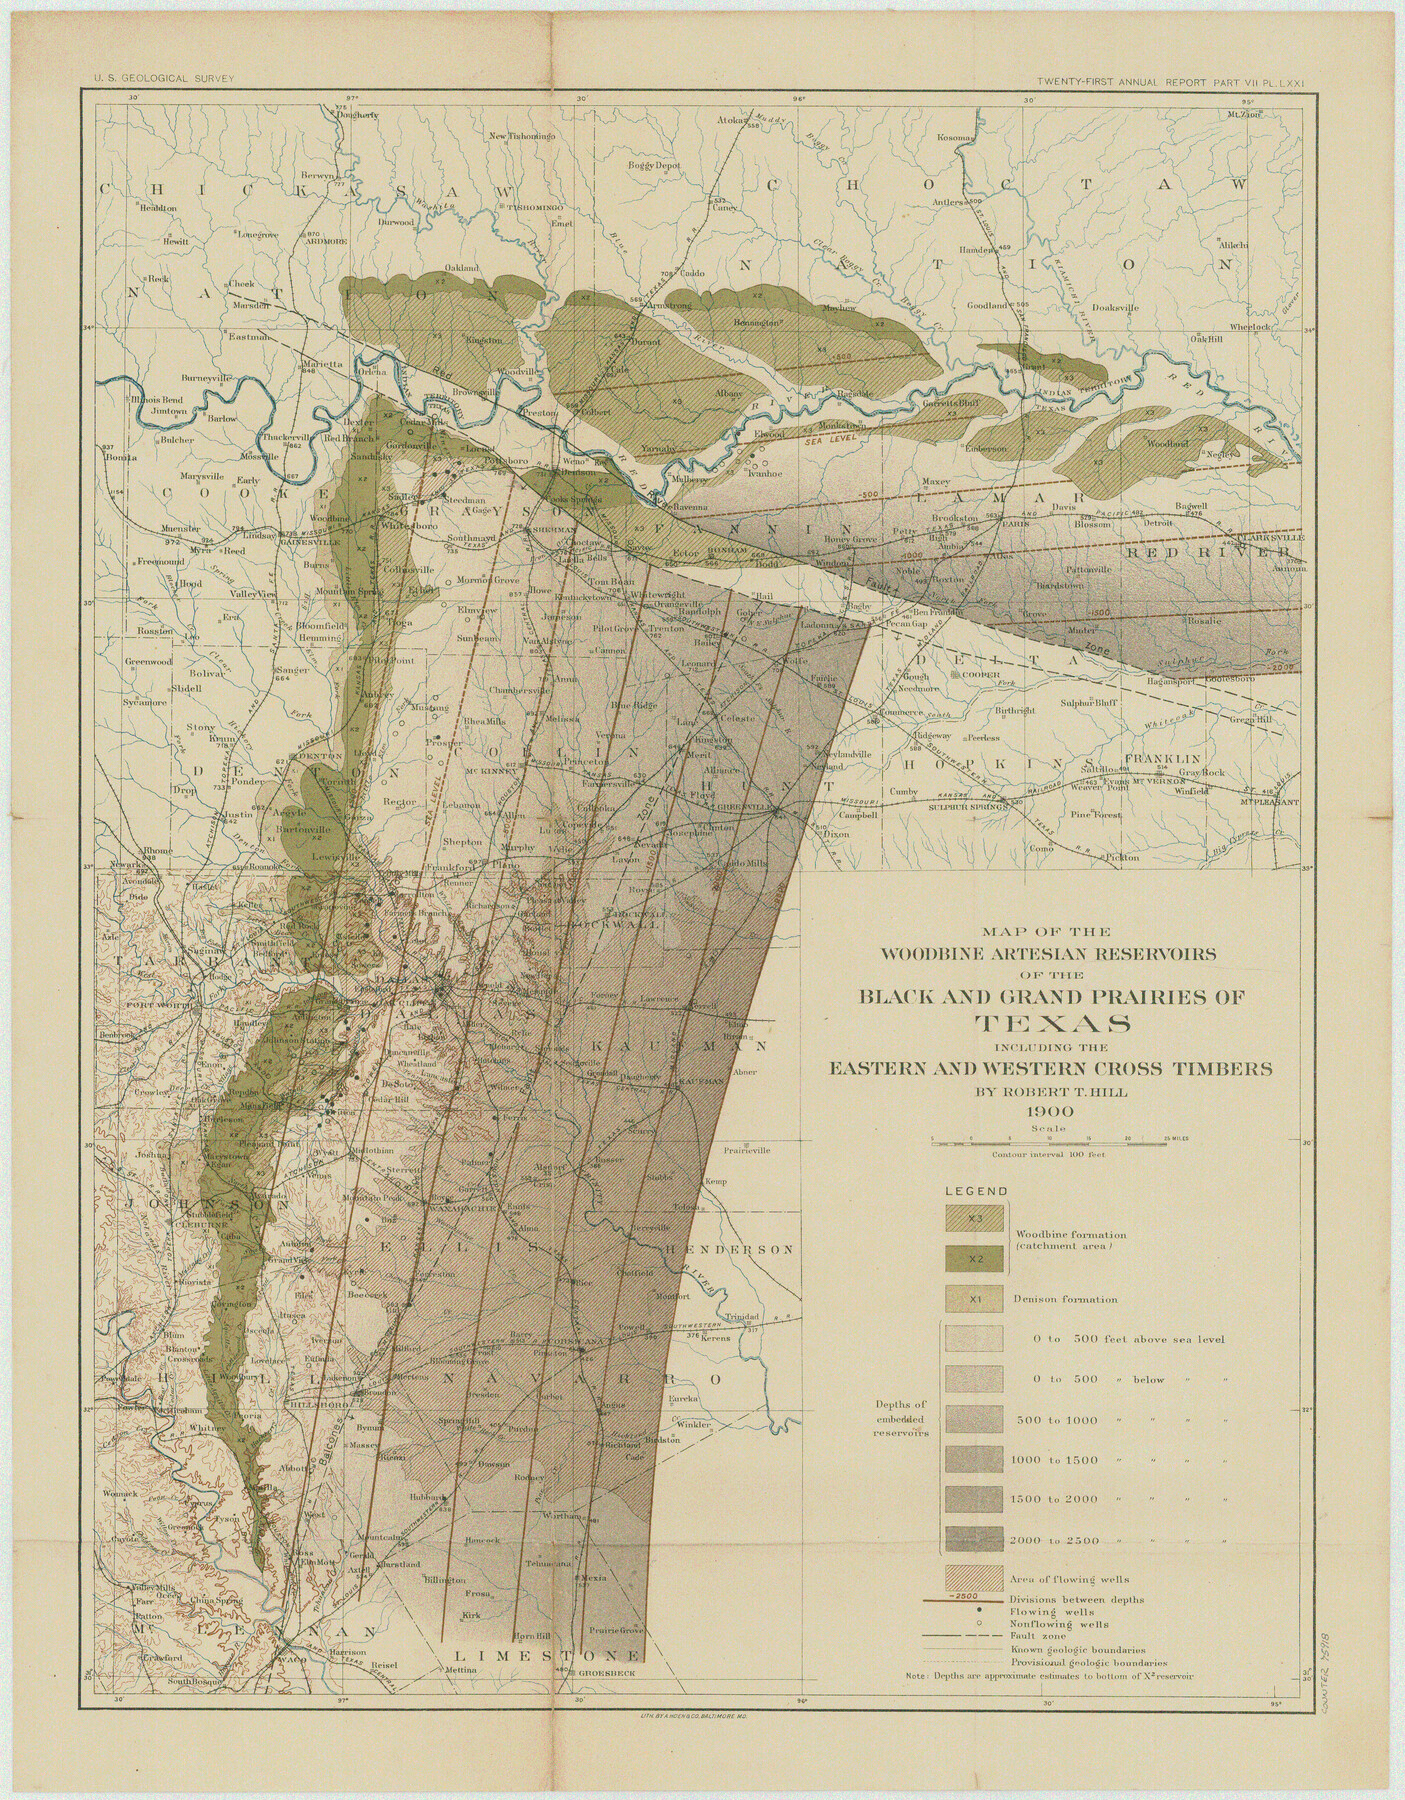 75918, Map of the Woodbine Artesian Reservoirs of the Black and Grand Prairies of Texas including the eastern and western Cross Timbers, General Map Collection